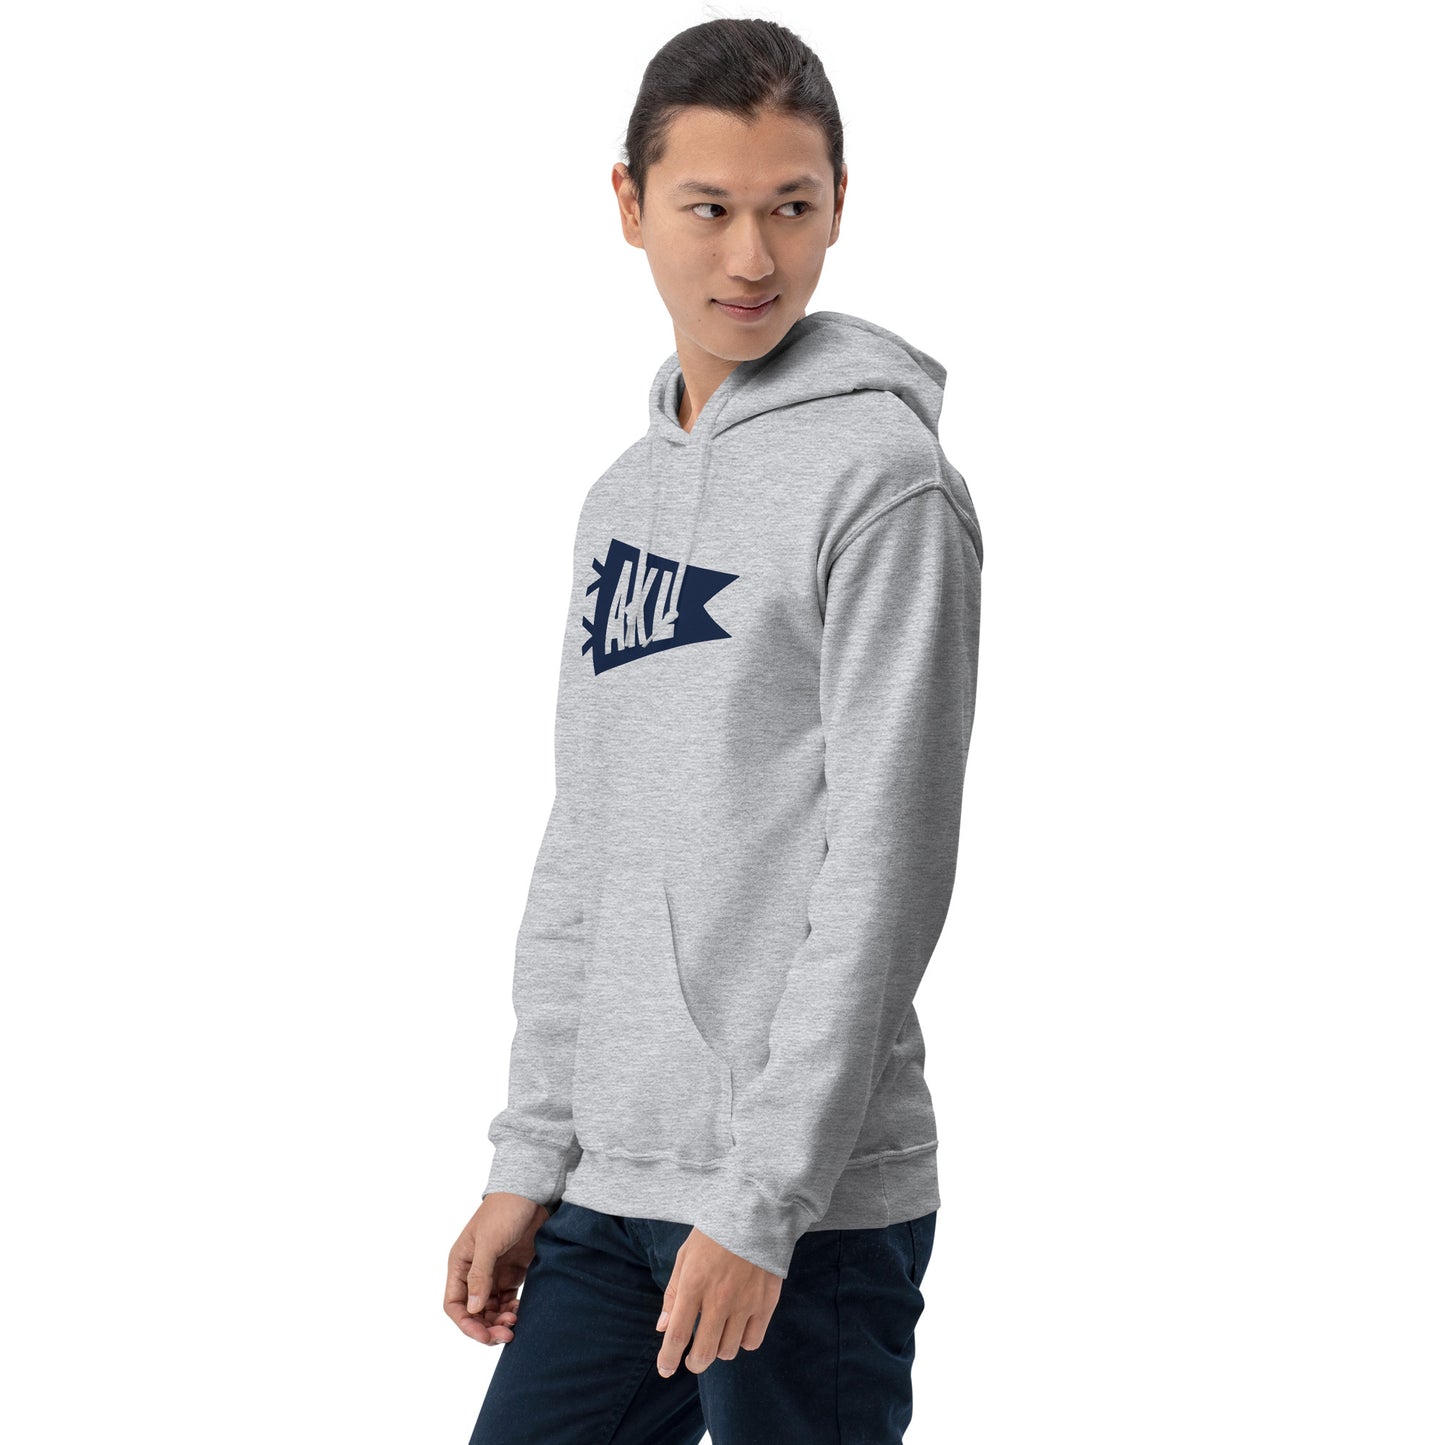 Airport Code Unisex Hoodie - Navy Blue Graphic • AKL Auckland • YHM Designs - Image 10